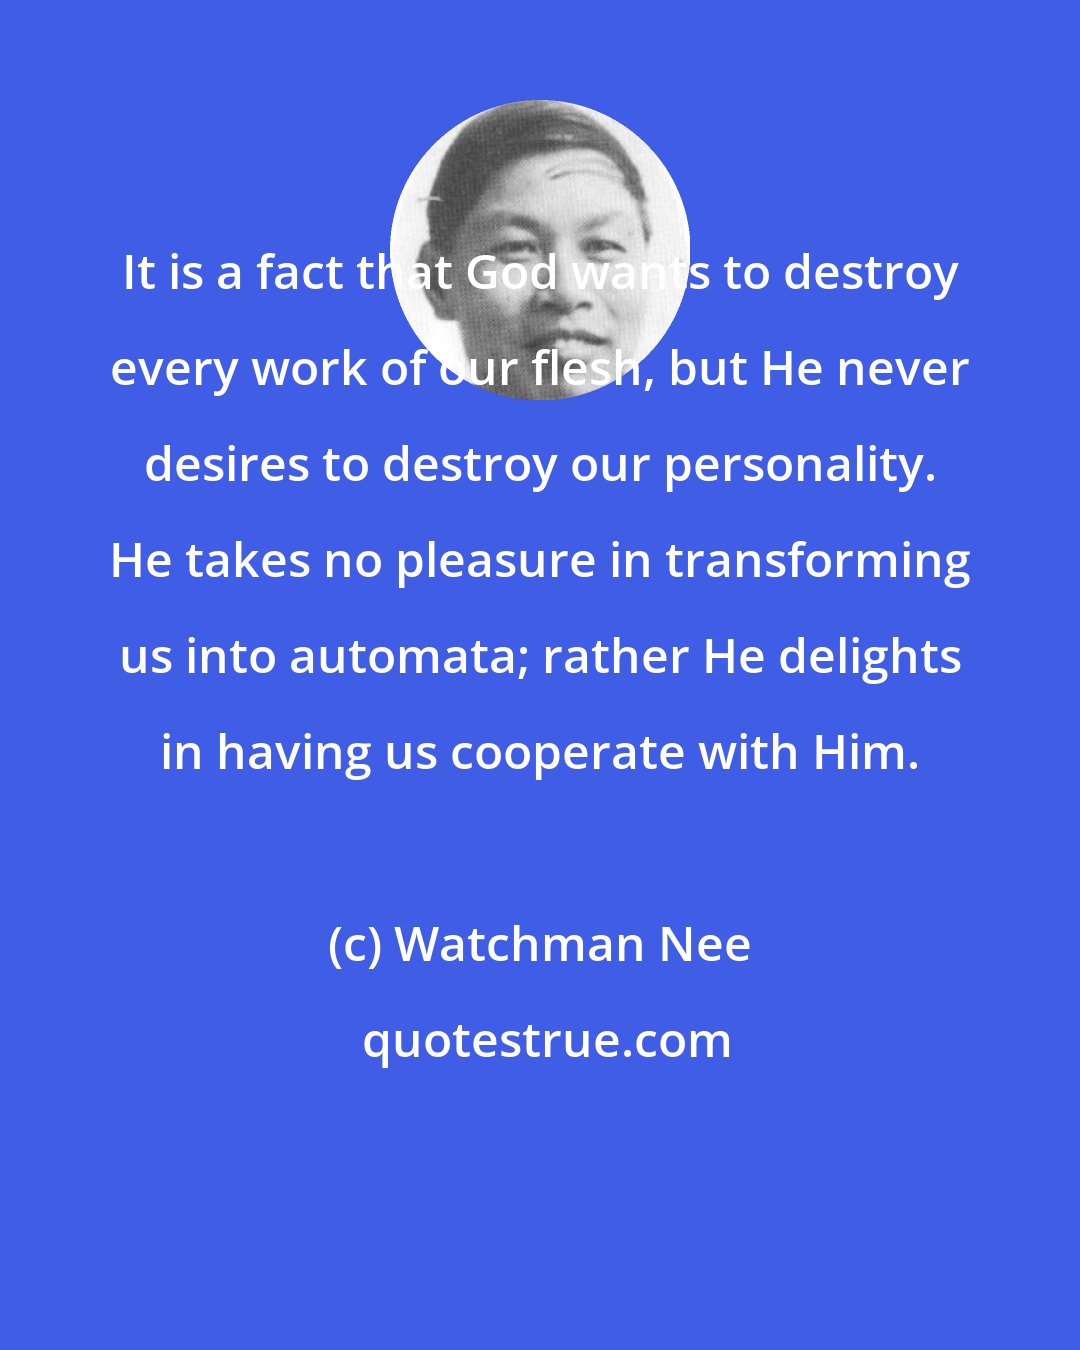 Watchman Nee: It is a fact that God wants to destroy every work of our flesh, but He never desires to destroy our personality. He takes no pleasure in transforming us into automata; rather He delights in having us cooperate with Him.